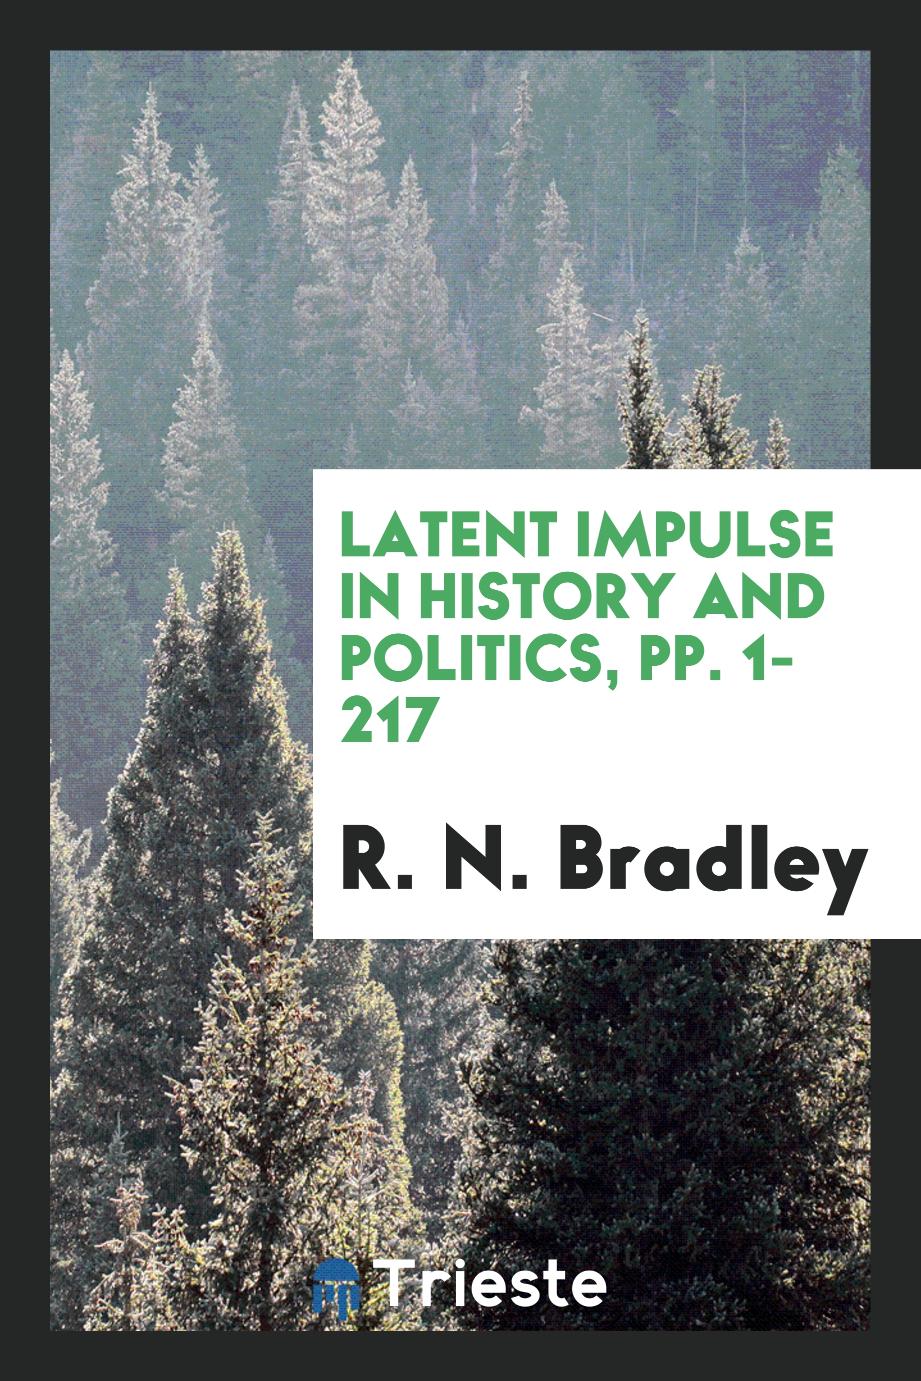 Latent impulse in history and politics, pp. 1-217